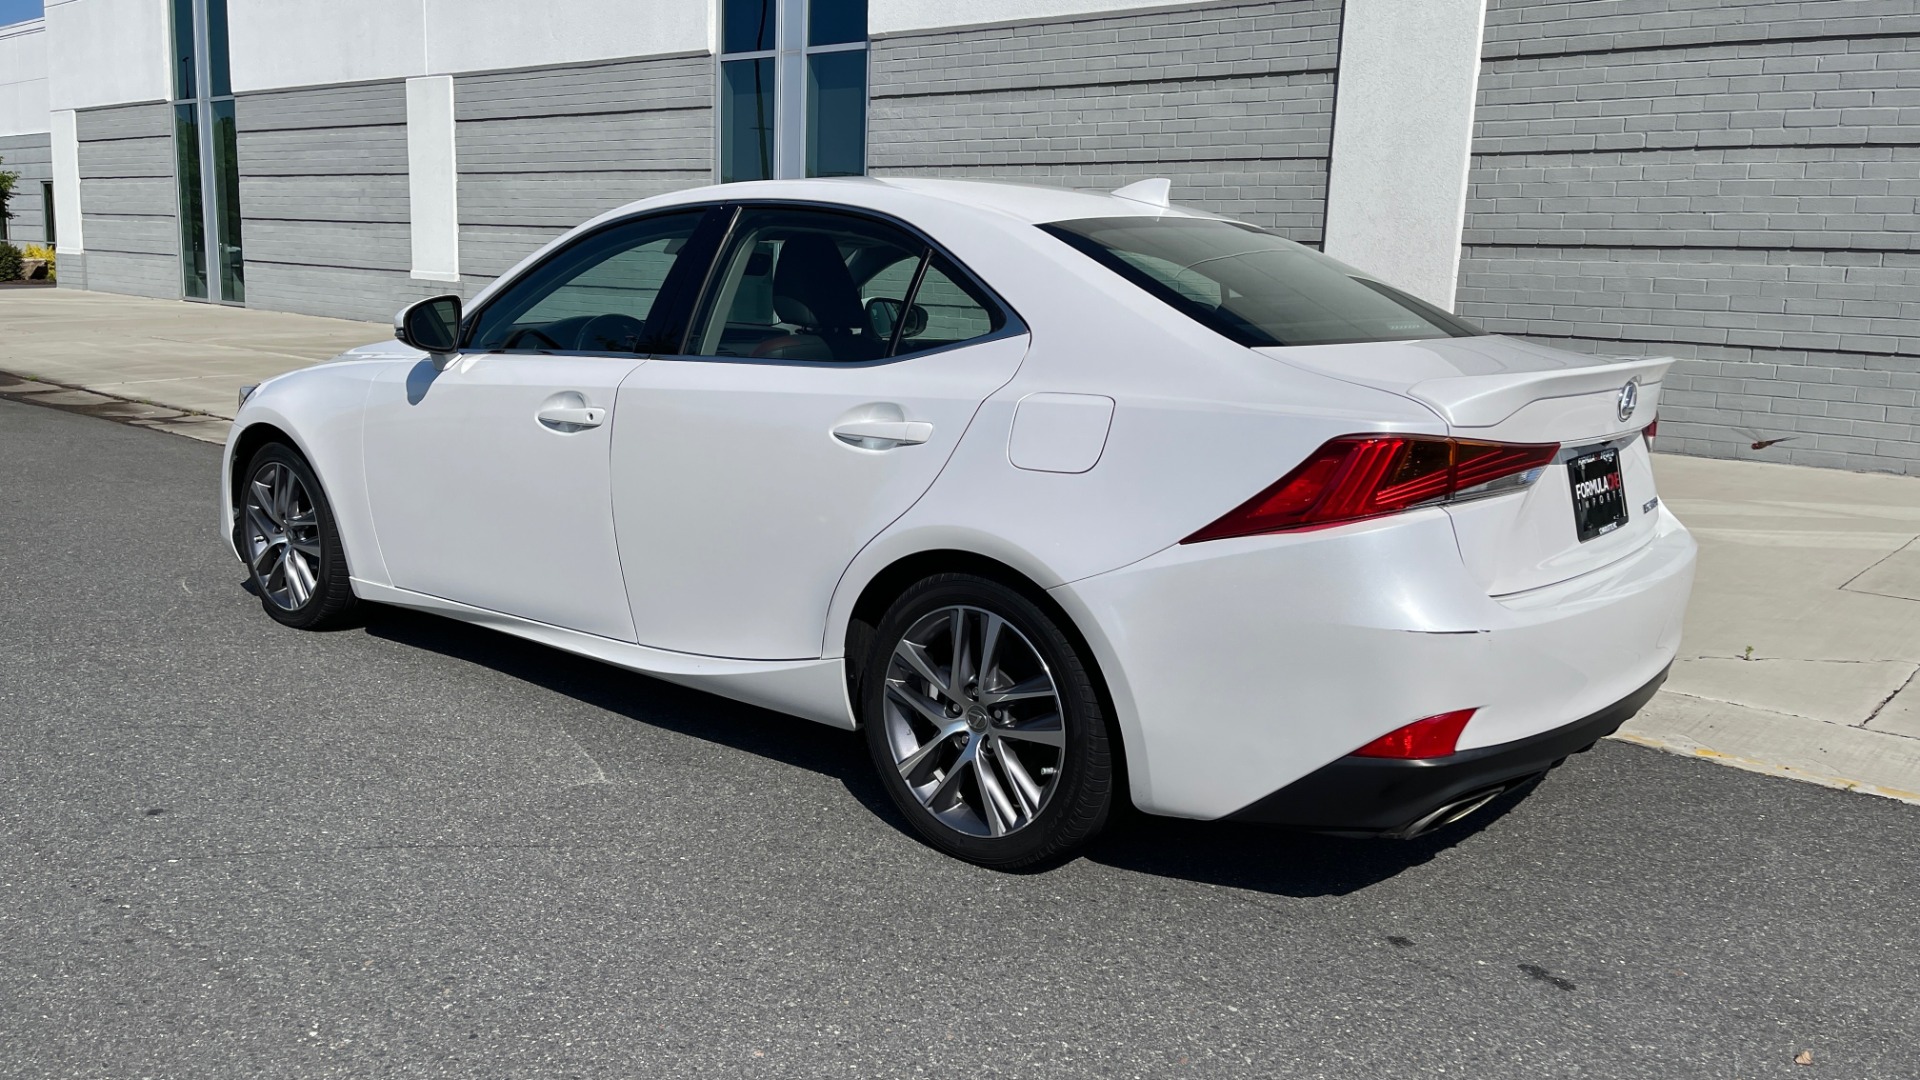 Used 2018 Lexus IS 300 / 2.0L TURBO / 8-SPD AUTO / SUNROOF / REARVIEW for sale Sold at Formula Imports in Charlotte NC 28227 5